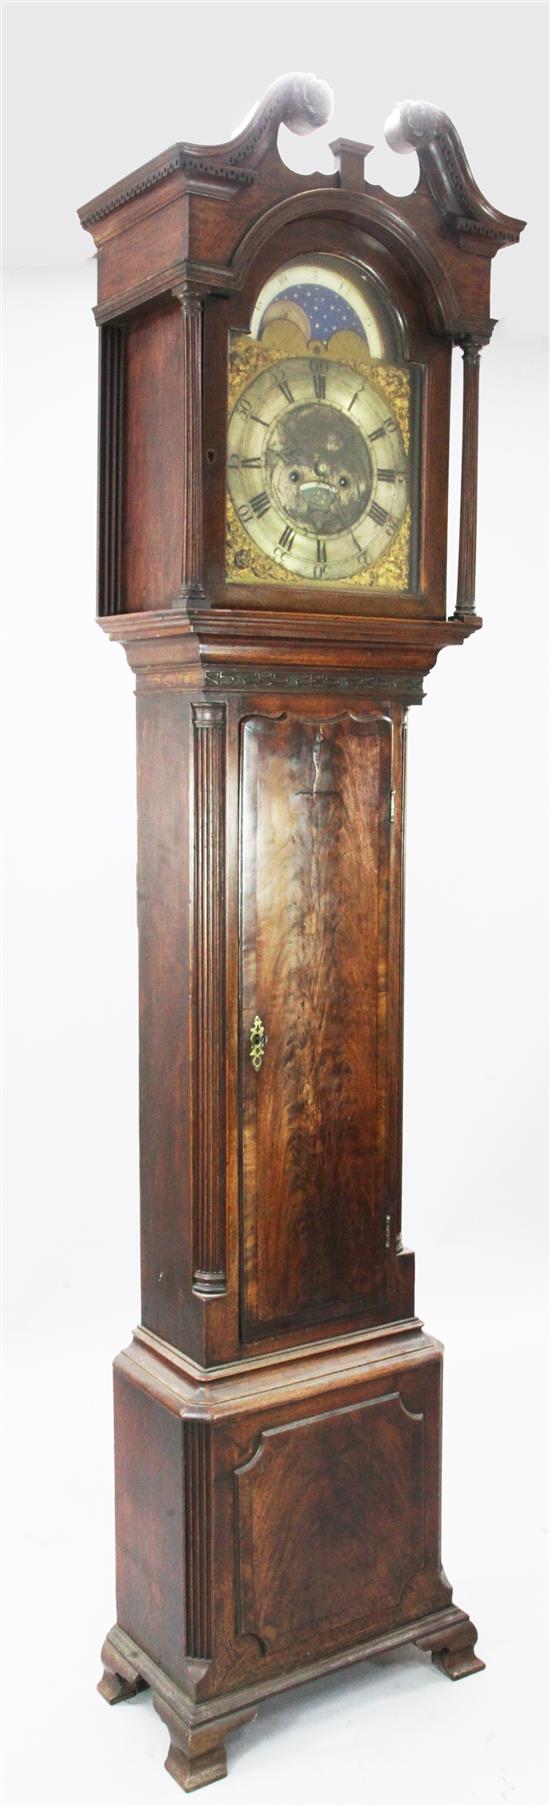 William Taylor of Whitehaven. A George III mahogany eight day longcase clock, H.7ft 7in.